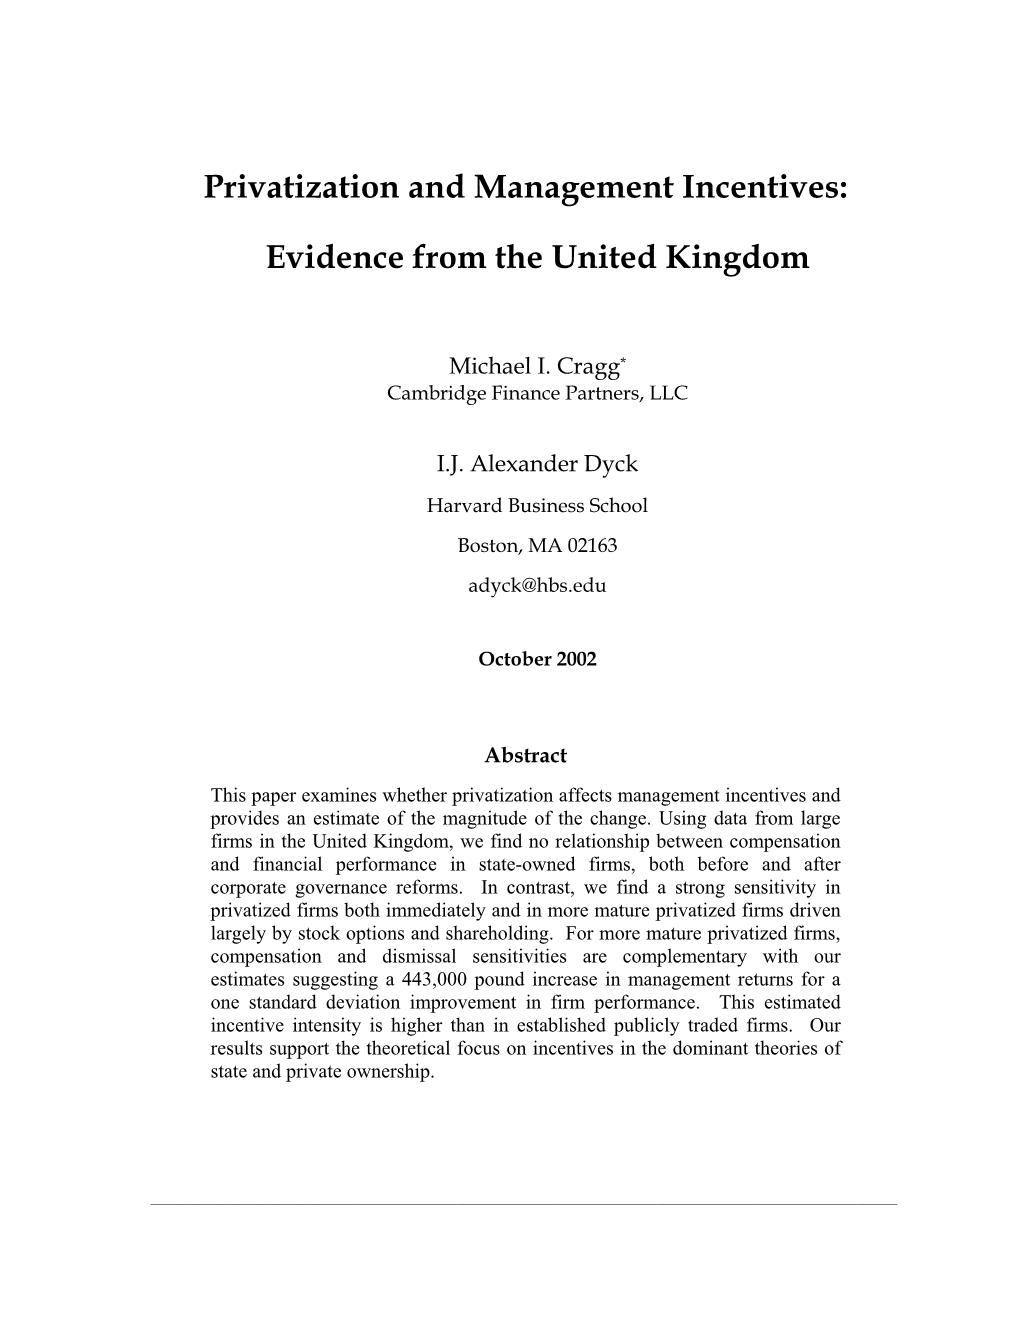 Privatization and Management Incentives